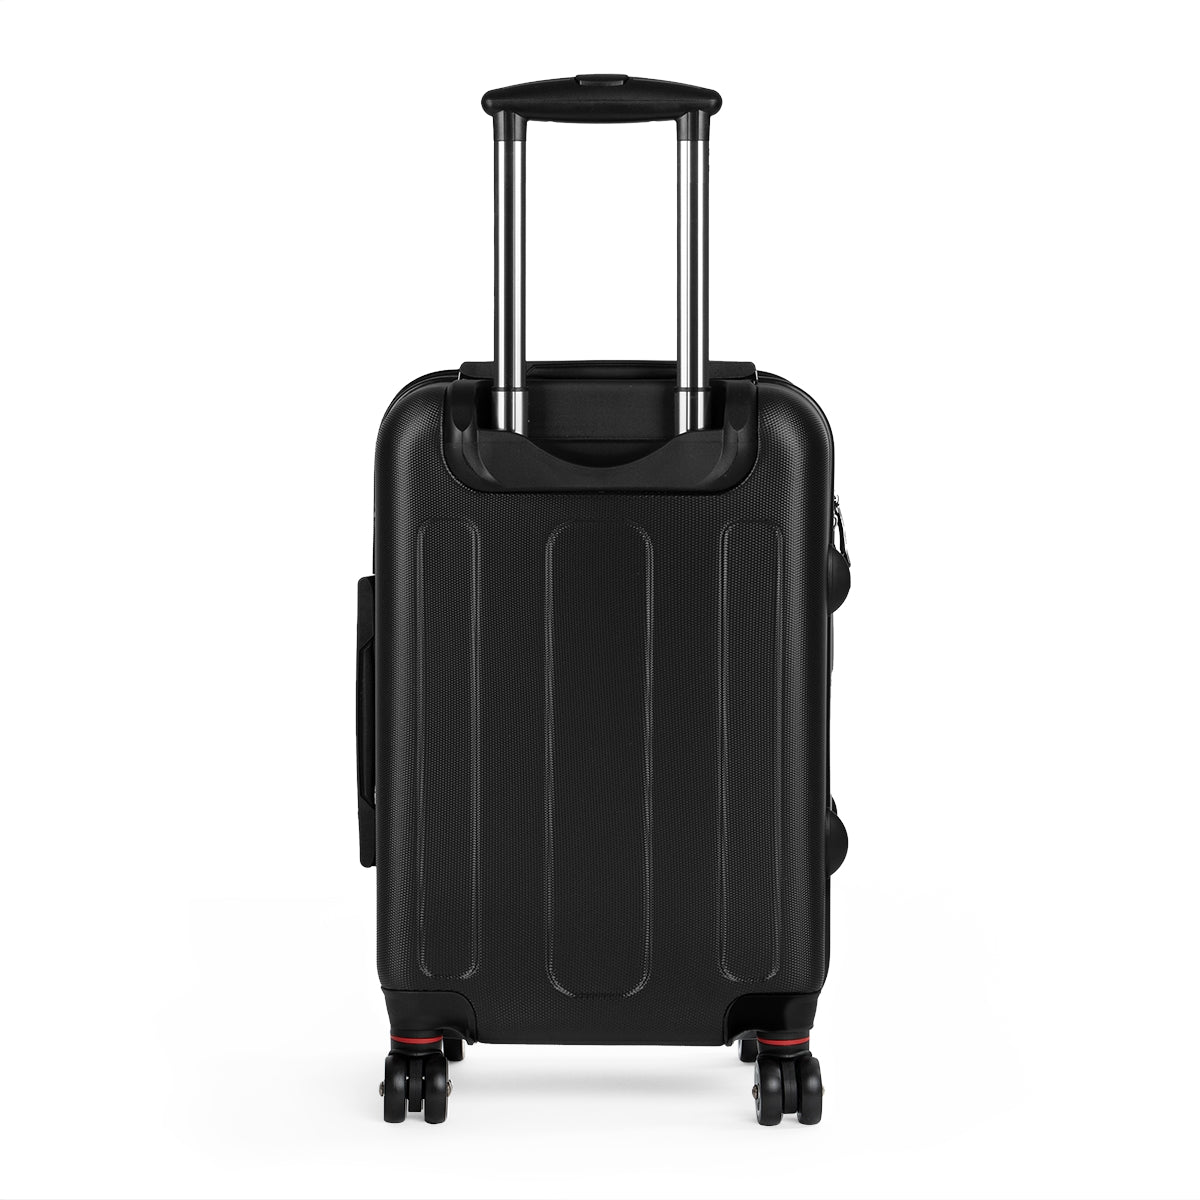 Getrott Syndics of the Drapers Guild by Rembrandt Black Cabin Suitcase Inner Pockets Extended Storage Adjustable Telescopic Handle Inner Pockets Double wheeled Polycarbonate Hard-shell Built-in Lock